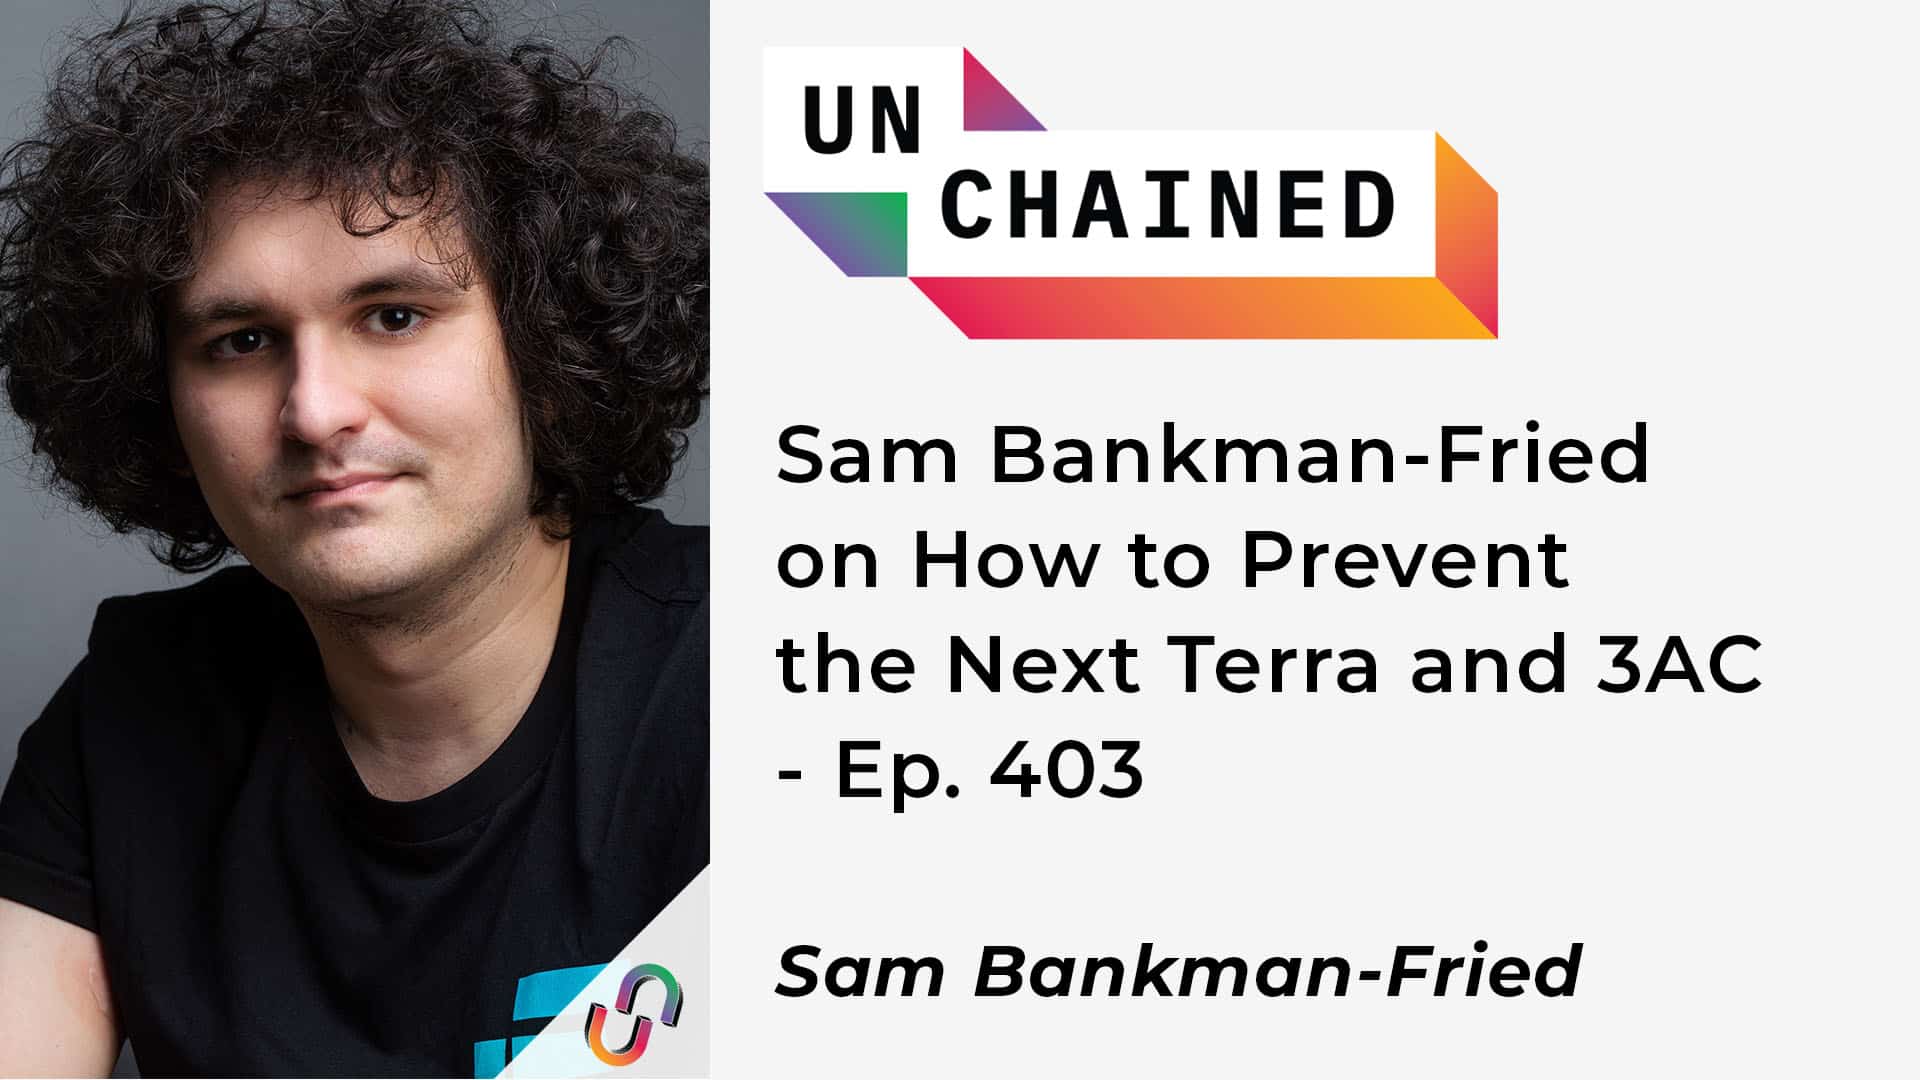 Sam Bankman-Fried on How to Prevent the Next Terra and 3AC - Ep. 403